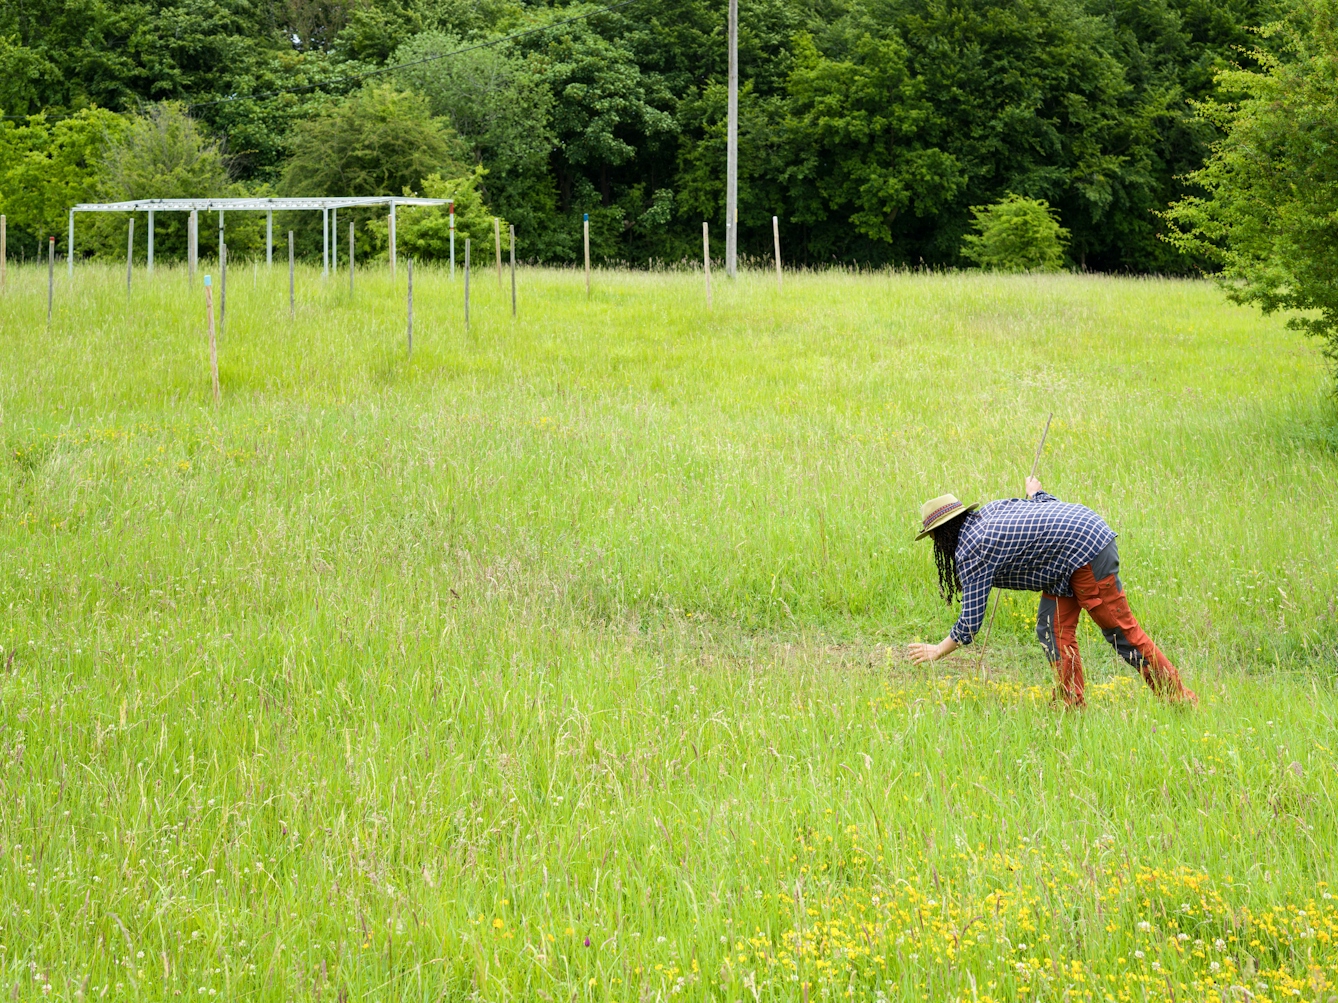 Colour photograph of a young woman wearing a brimmed hat, checked shirt and red trousers lunging forwards in a wild grassland meadow. She is holding a long bamboo stick. Her left hand is reaching out as if about to grasp a plant or an insect. Behind her in the distance is a tree lined border with a series of man made metal and wooden framed structures.